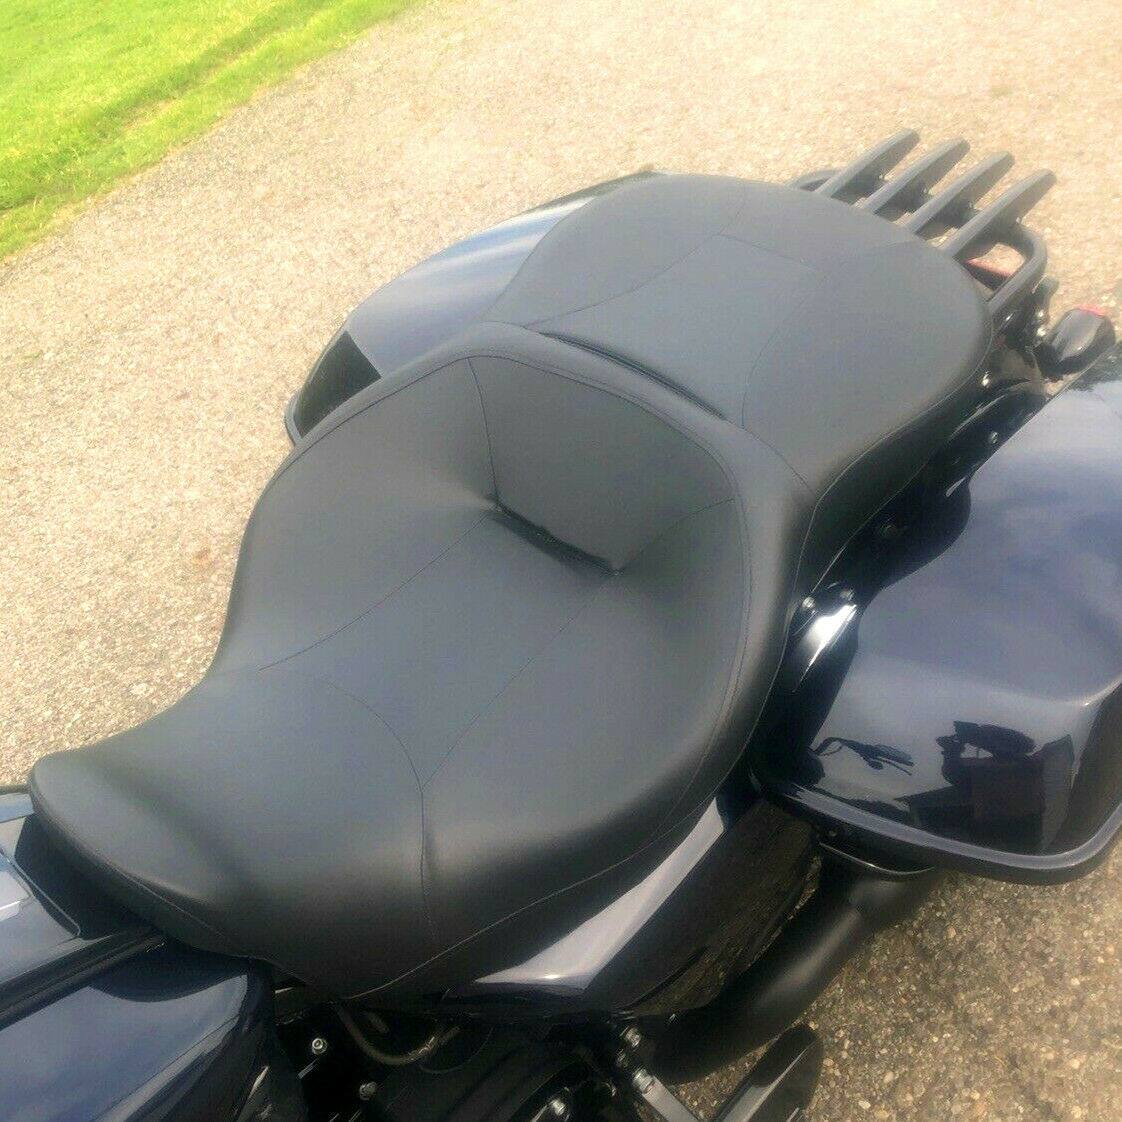 Rider and Passenger Seat For Harley Davidson 09-21 Electra Glide Road King CVO - Moto Life Products